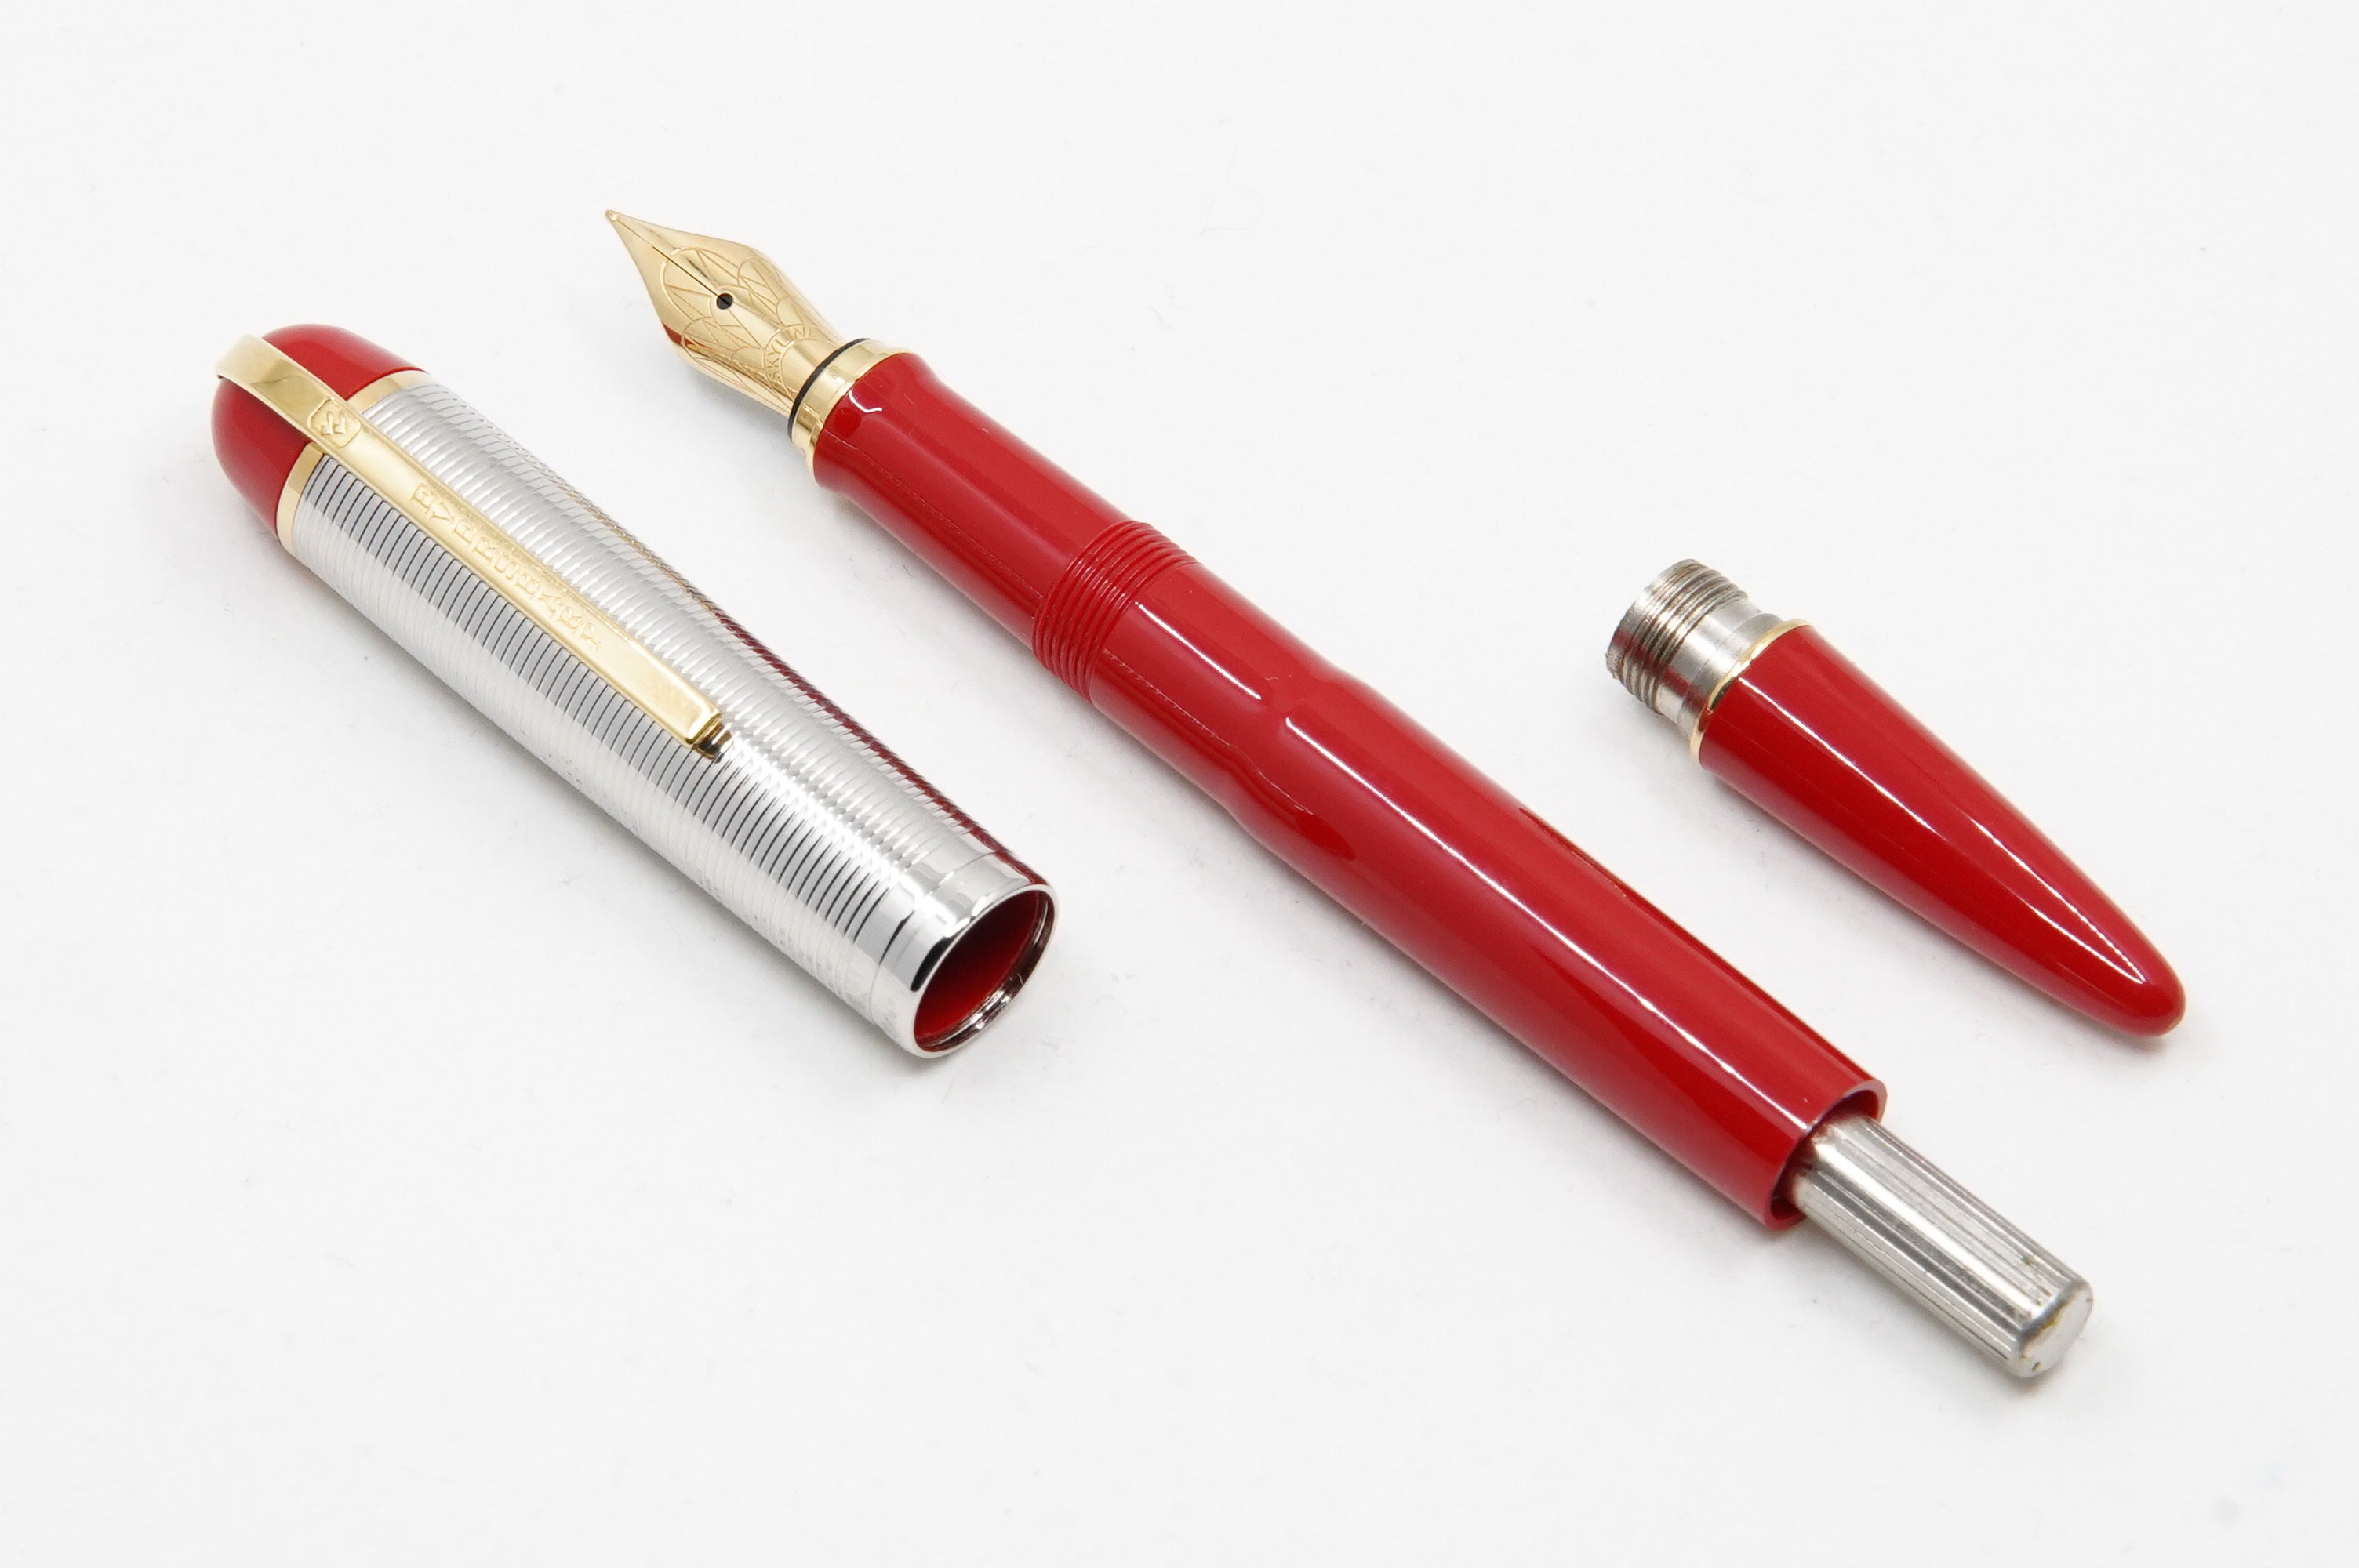 Wahl Eversharp Skyline FP Speed Red - The iconic SKYLINE created by Henry Dreyfus in 1939